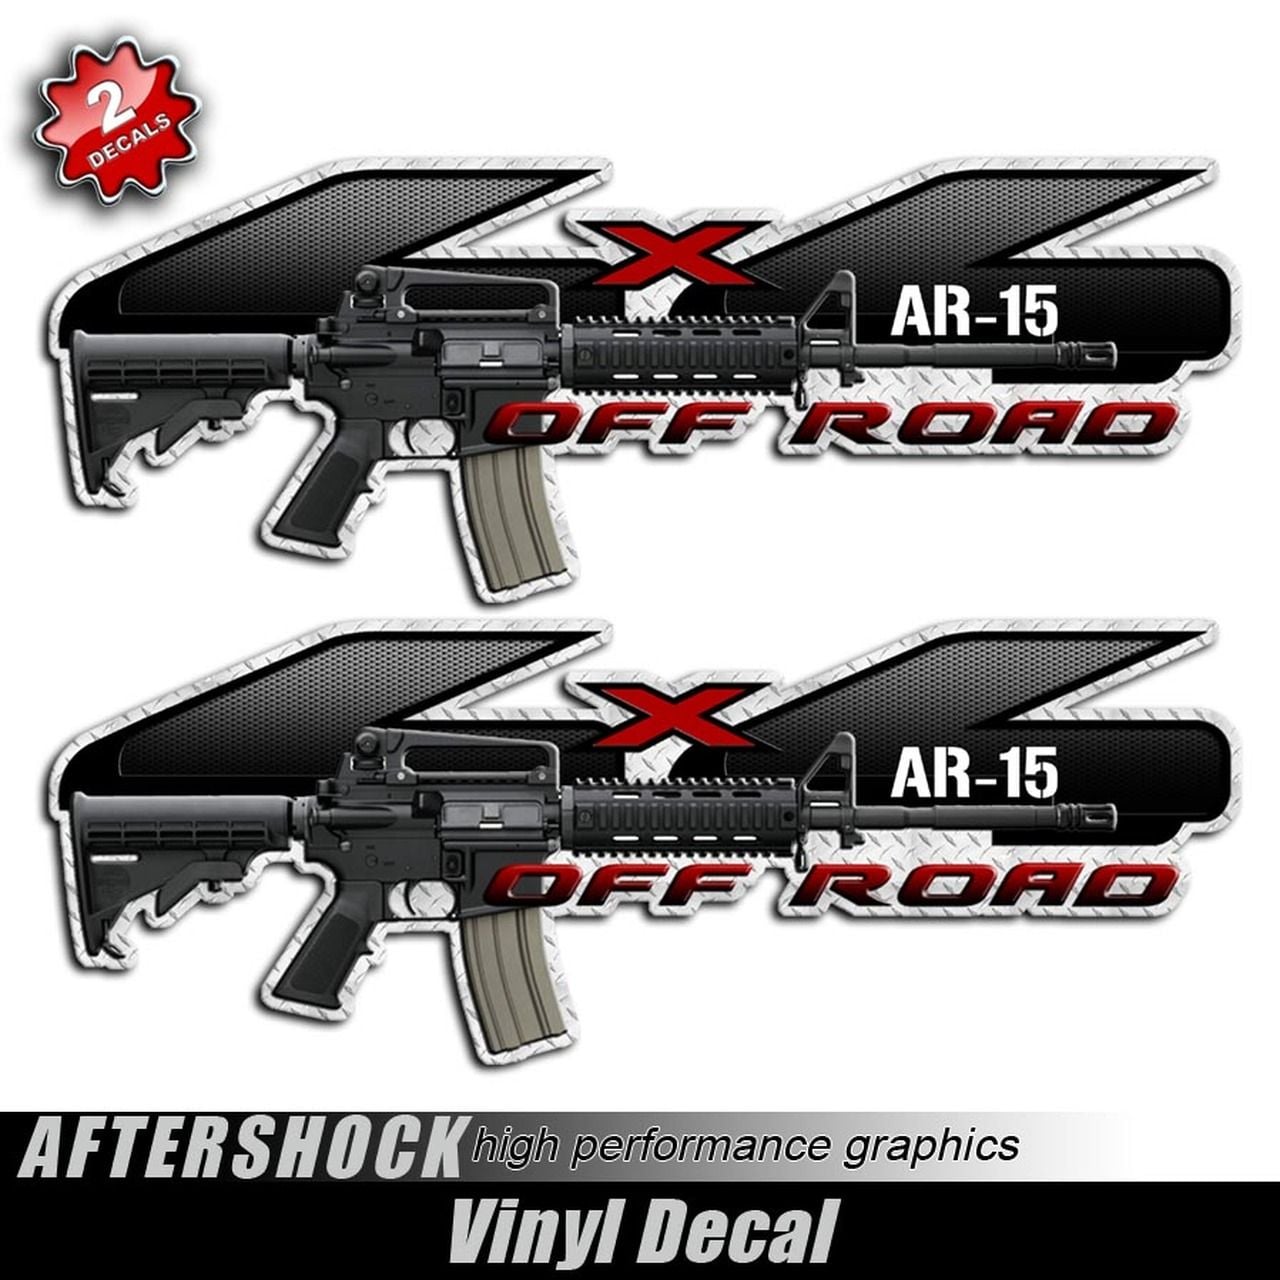 Alternative to 4x4 sticker - Page 3 - Ford Truck Enthusiasts Forums